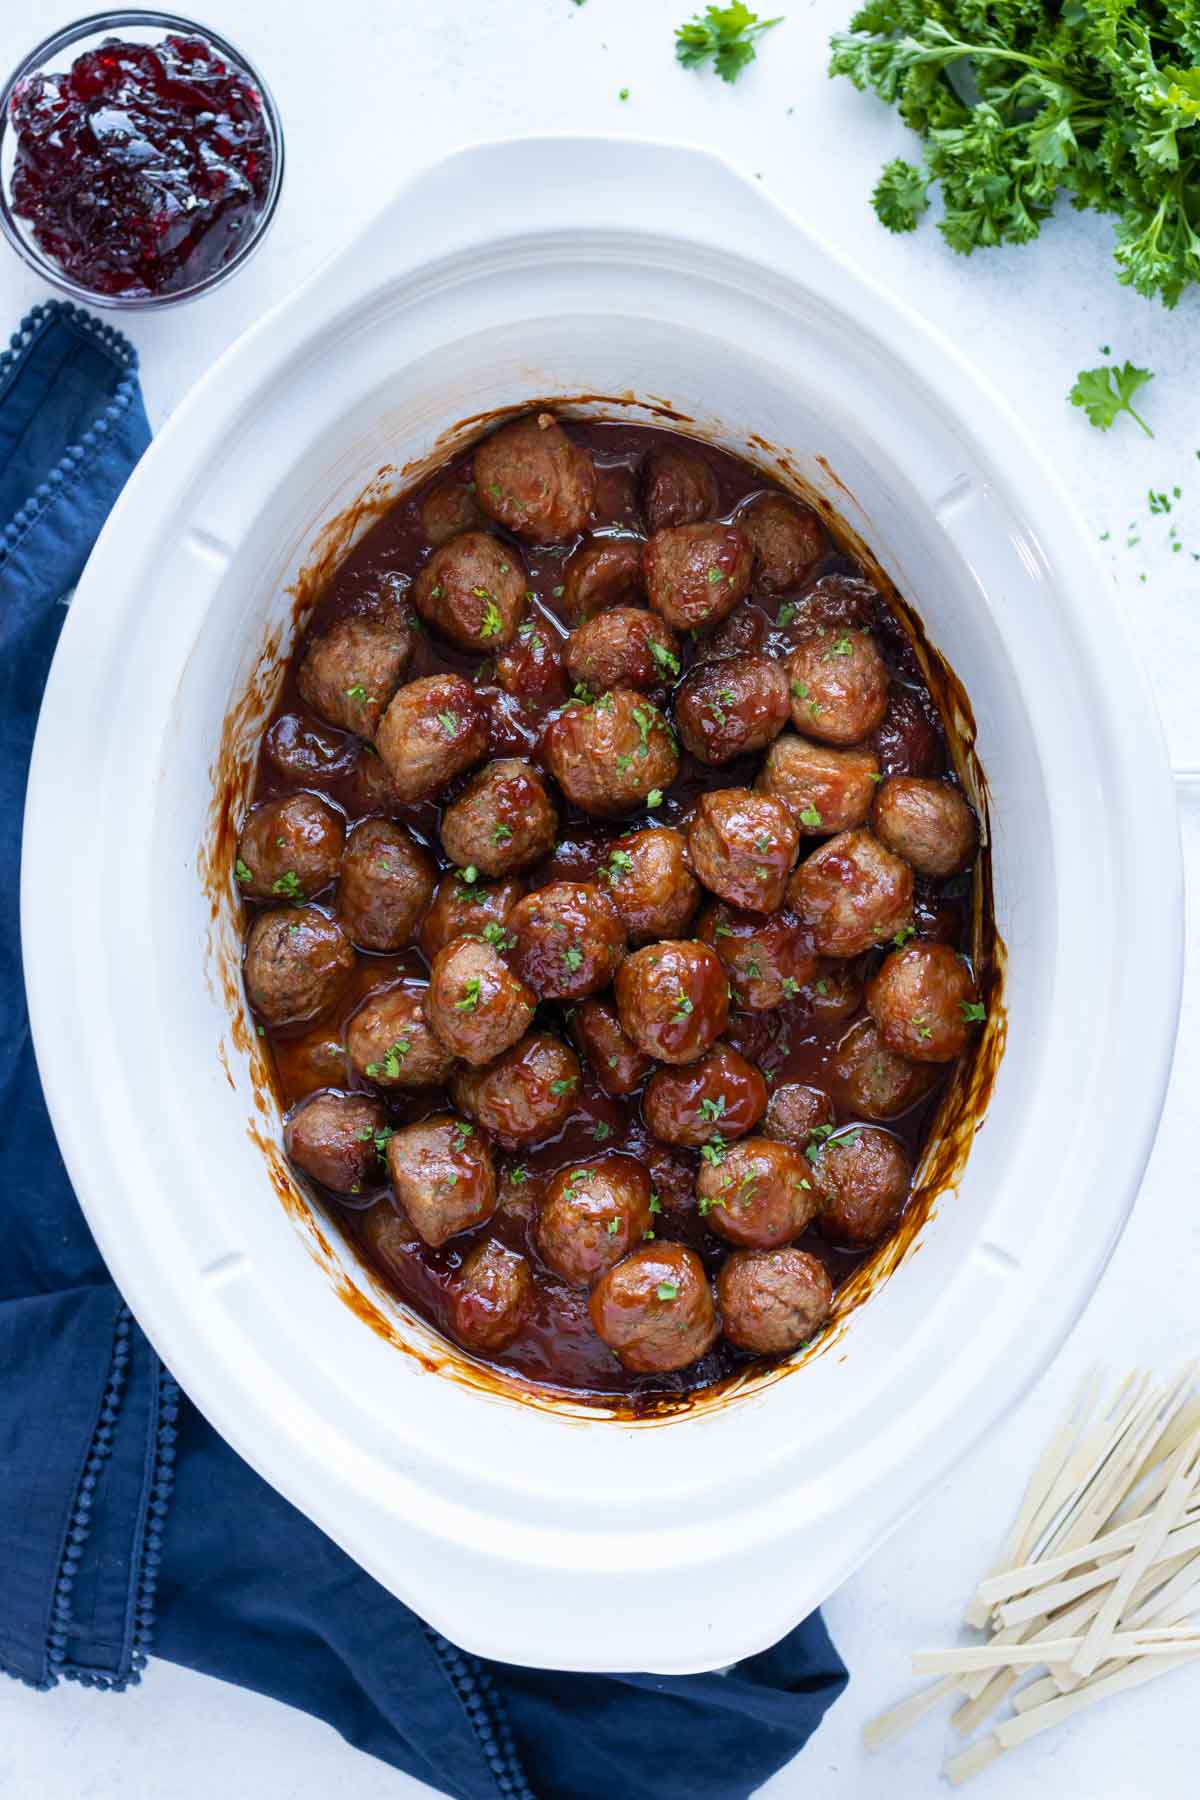 Slow cooker meatballs are show in their delicious sauce.